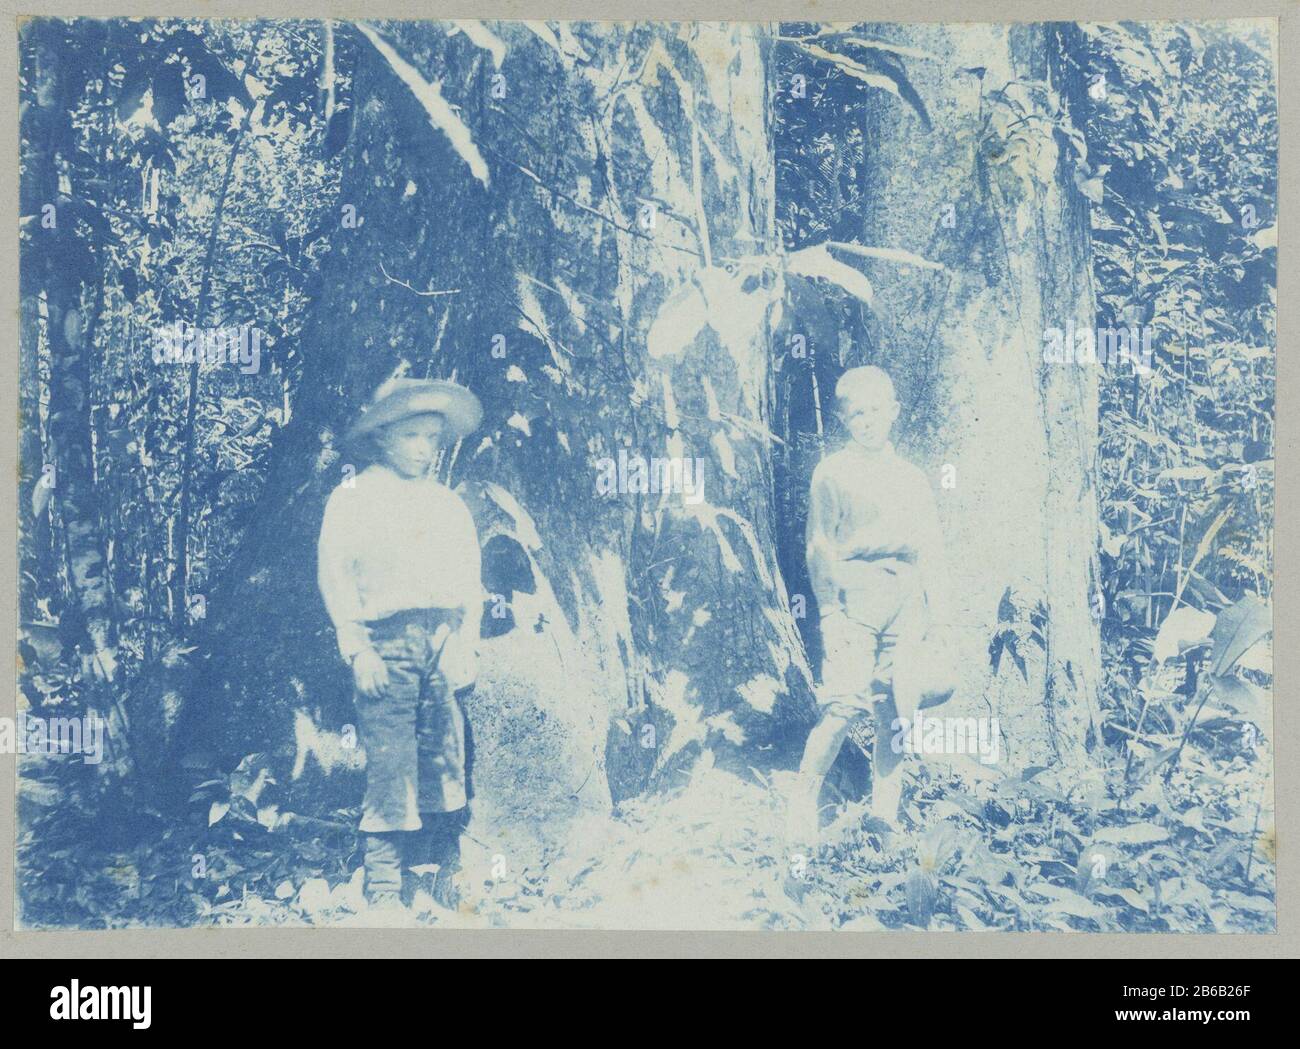 Anton and Peter behind Tourtonne (title object) Two guys named Anton and Peter standing behind trees for plantation Tourtonne. Part of the album Souvenir de Voyage (Part 1), about the life of the Doijer family in and around the plantation Ma Retraite in Suriname during the years 1906-1913. Manufacturer : Photographer: Hendrik Doijer (attributed to) Place manufacture: Suriname Date: 1906 - 1913 Physical features: cyanotypie Material: paper Technique: cyanotypie Dimensions: photo: h 123 mm × W 171 mm Date: 1906 - 1913 Stock Photo